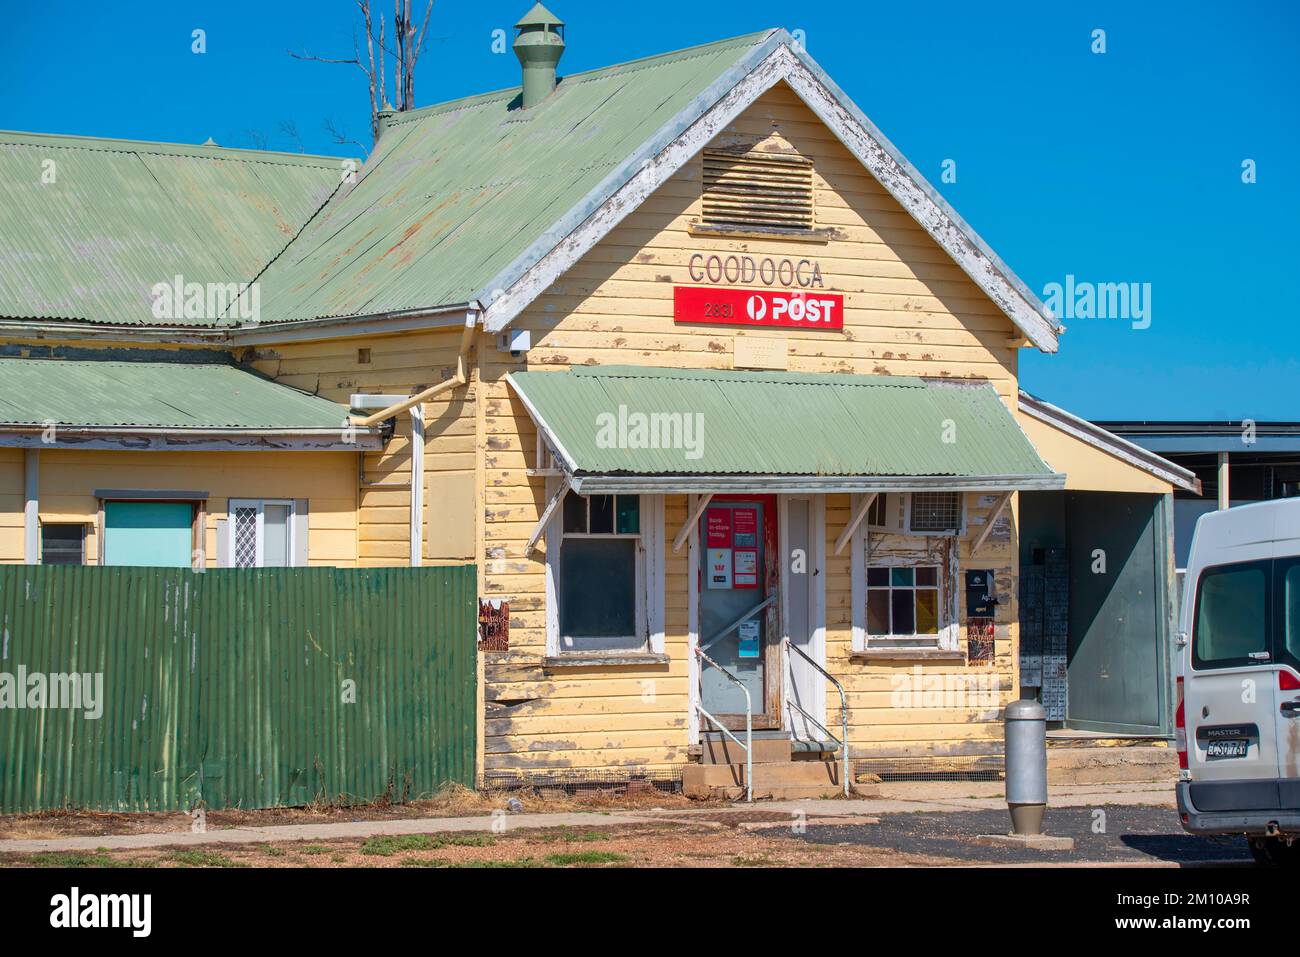 The steel roof and timber weatherboard, Federation style, post office at the village of Goodooga in outback New South Wales, Australia Stock Photo